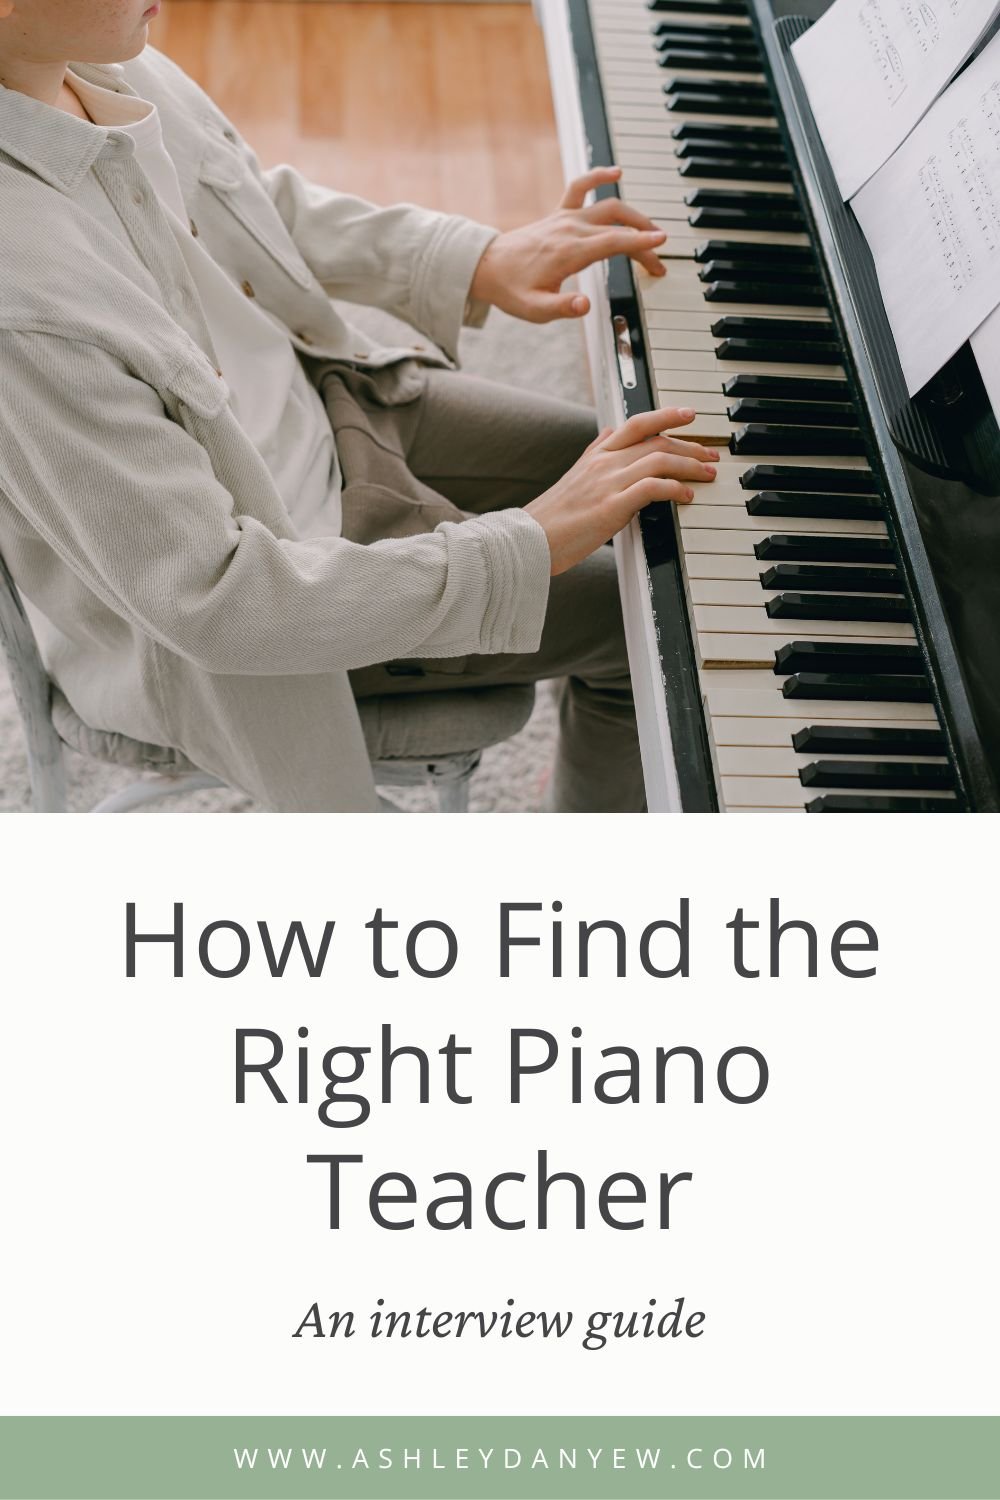 How to Find the Right Piano Teacher